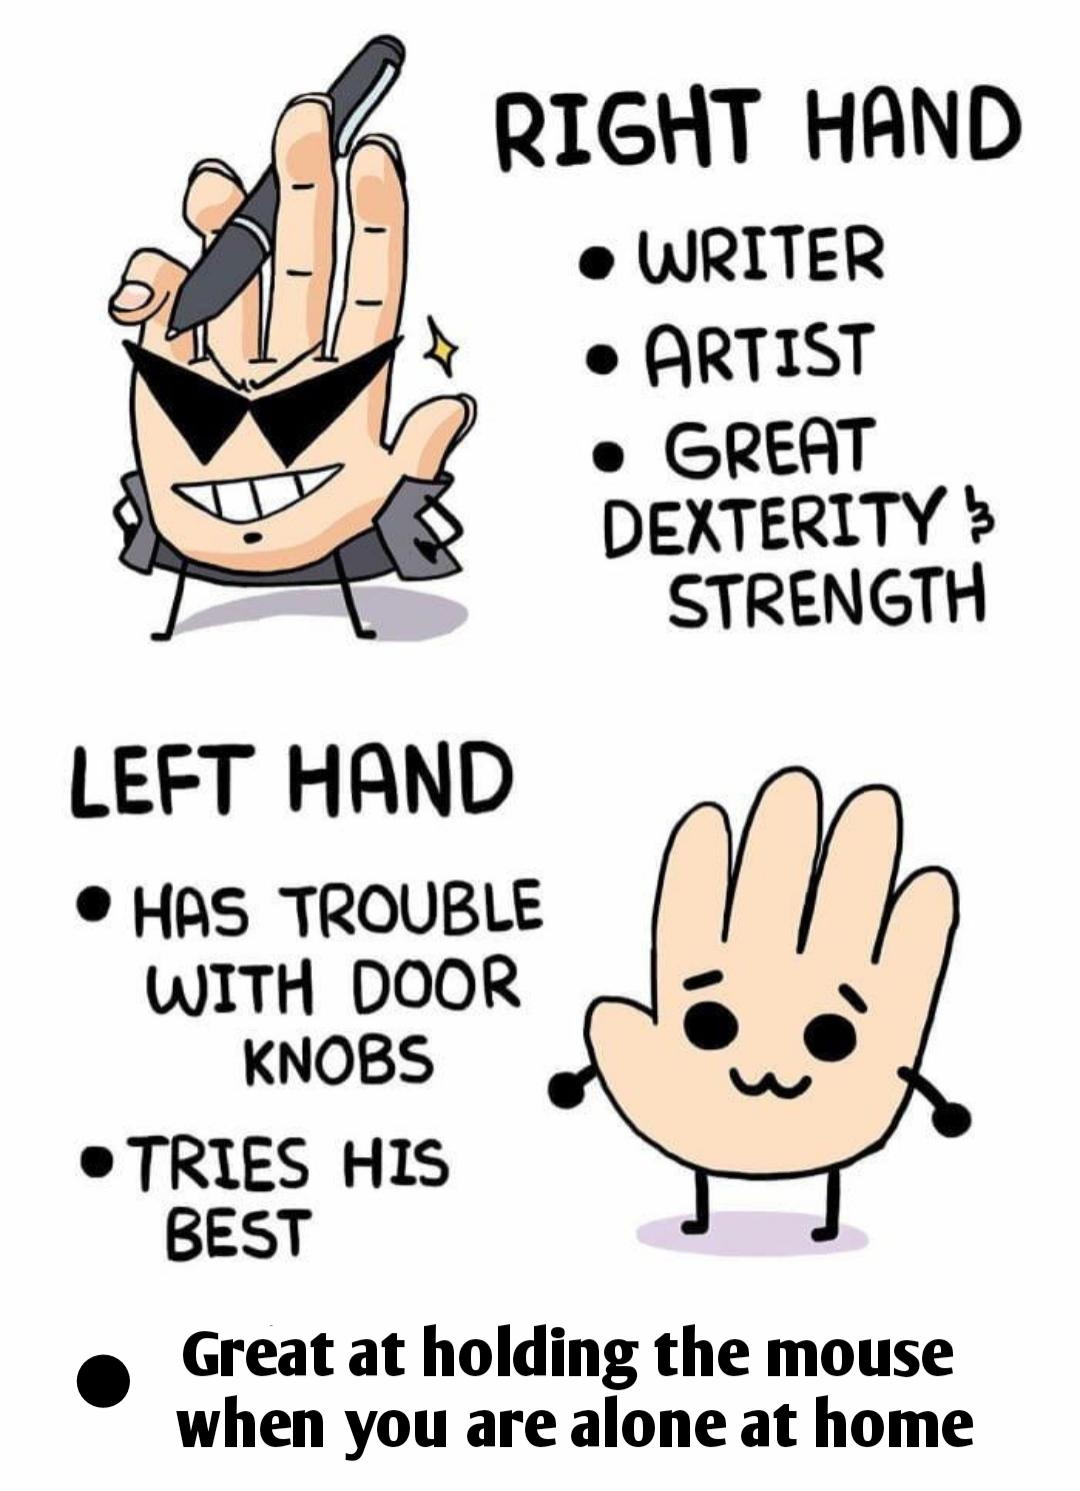 left handed memes funny - Right Hand Writer Artist Great Dexterity } Strength Left Hand Has Trouble With Door Knobs Tries His Best Great at holding the mouse when you are alone at home